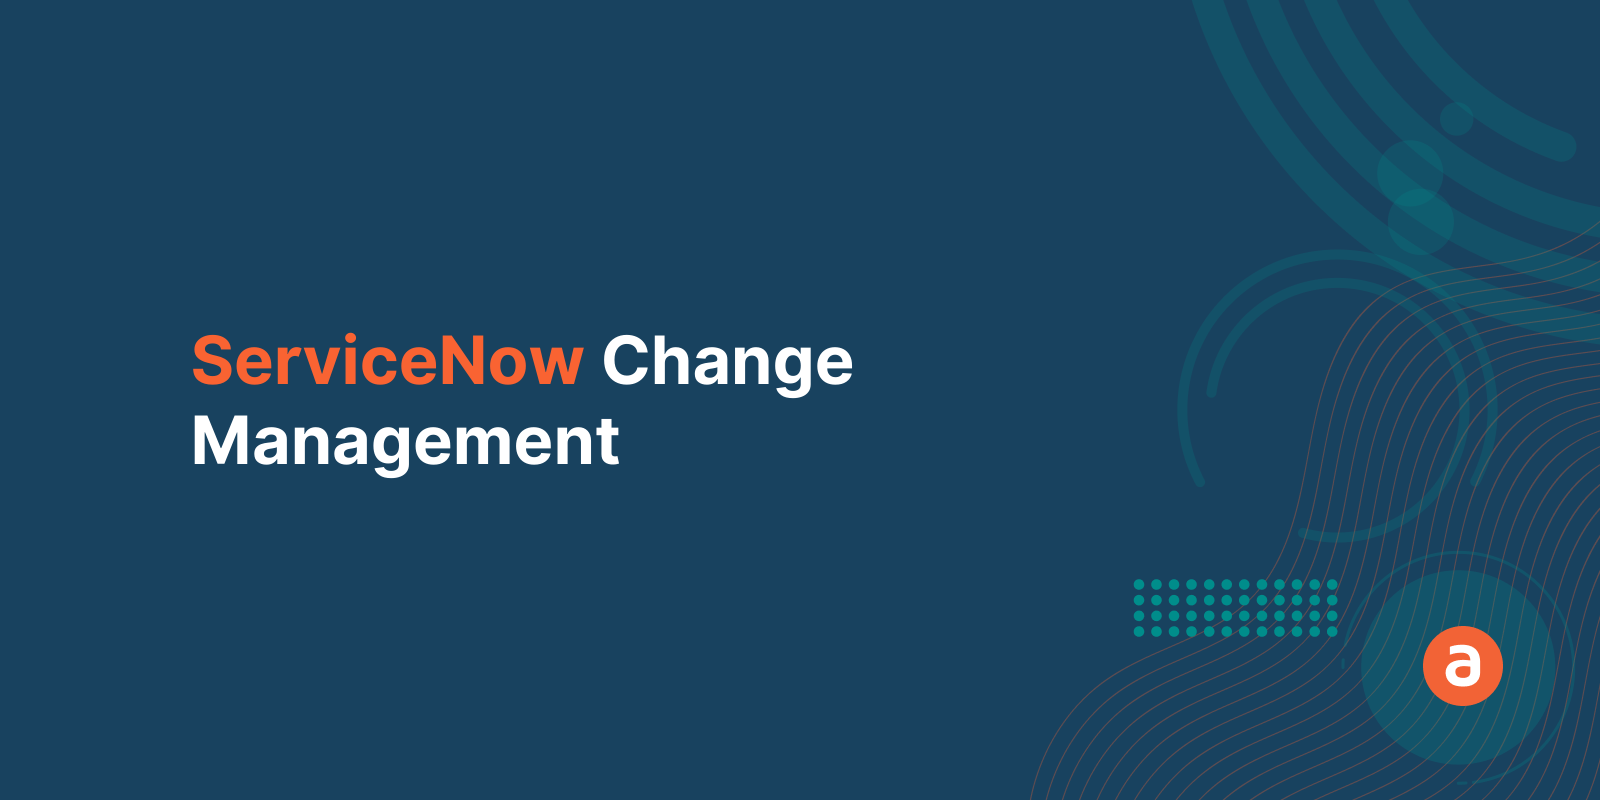 ServiceNow Change Management Guide for 2021